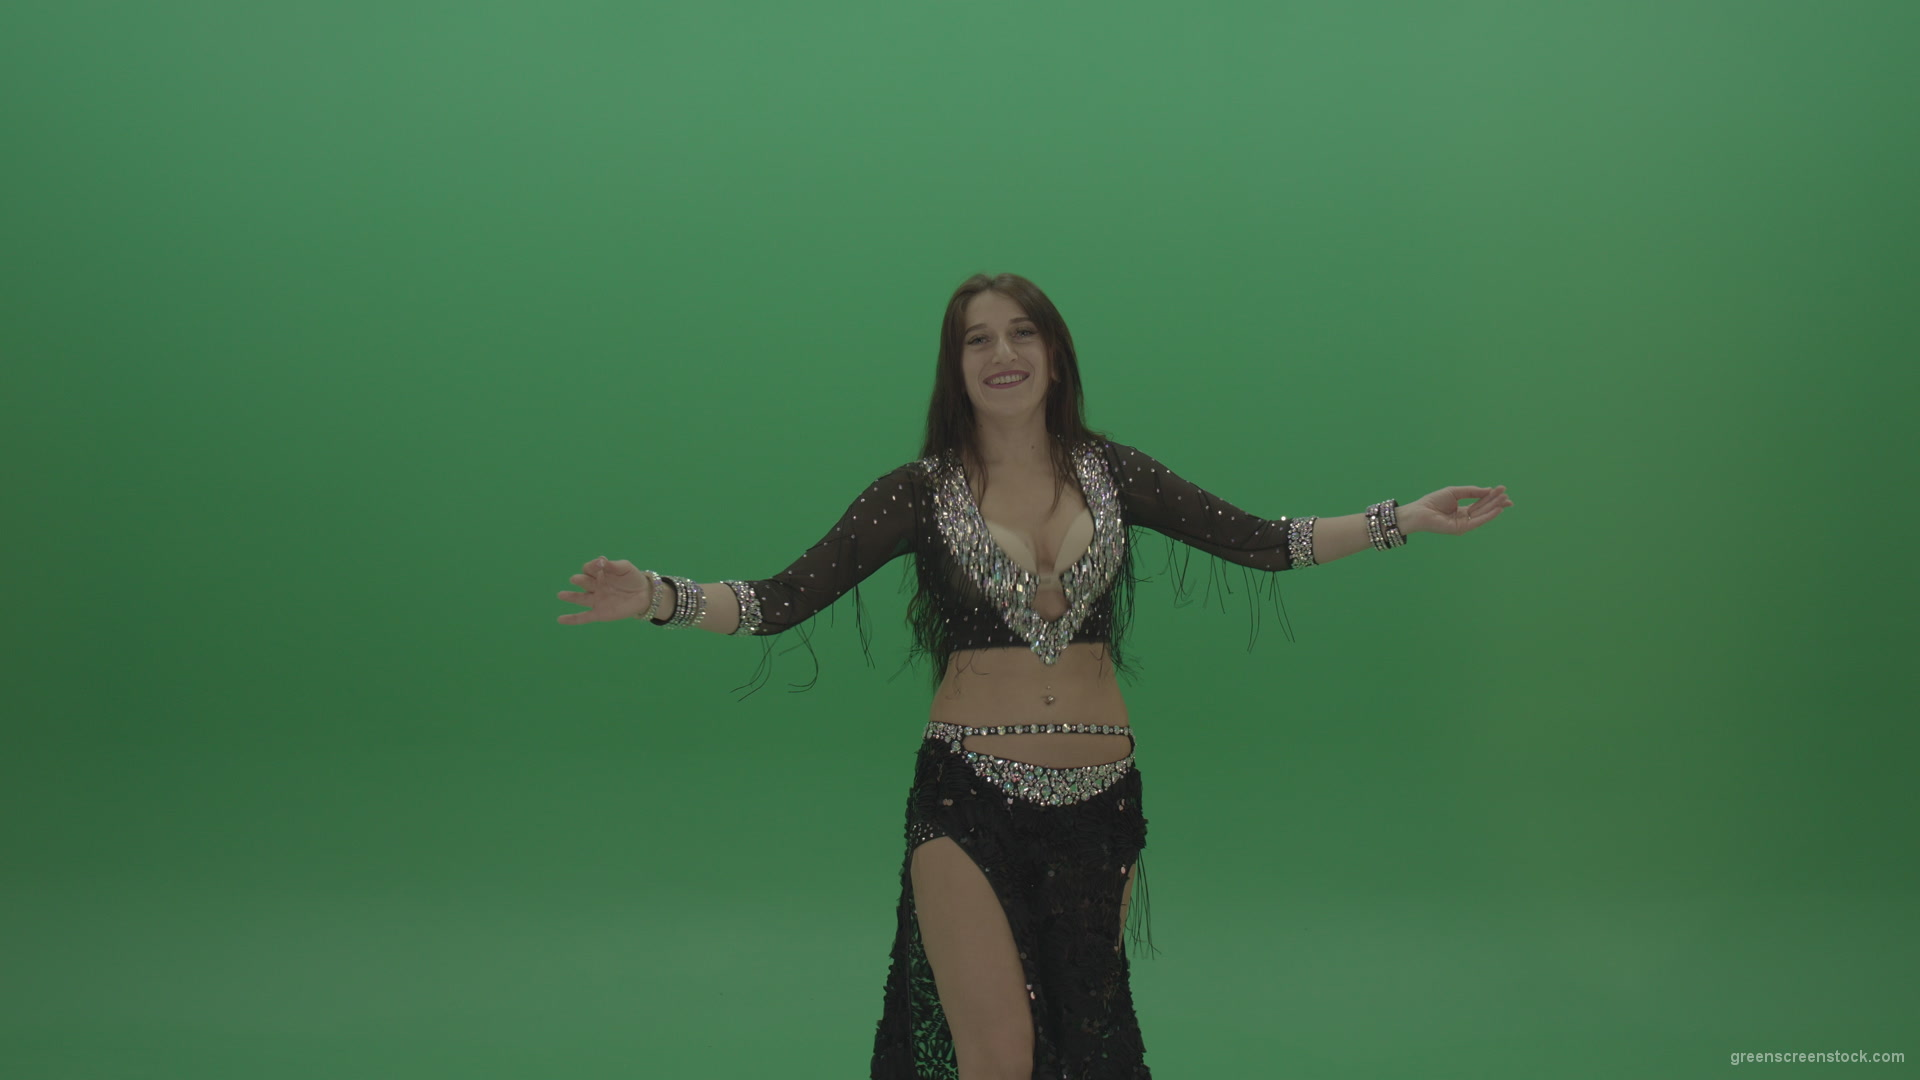 Refined-belly-dancer-in-black-wear-display-amazing-dance-moves-over-chromakey-background_008 Green Screen Stock